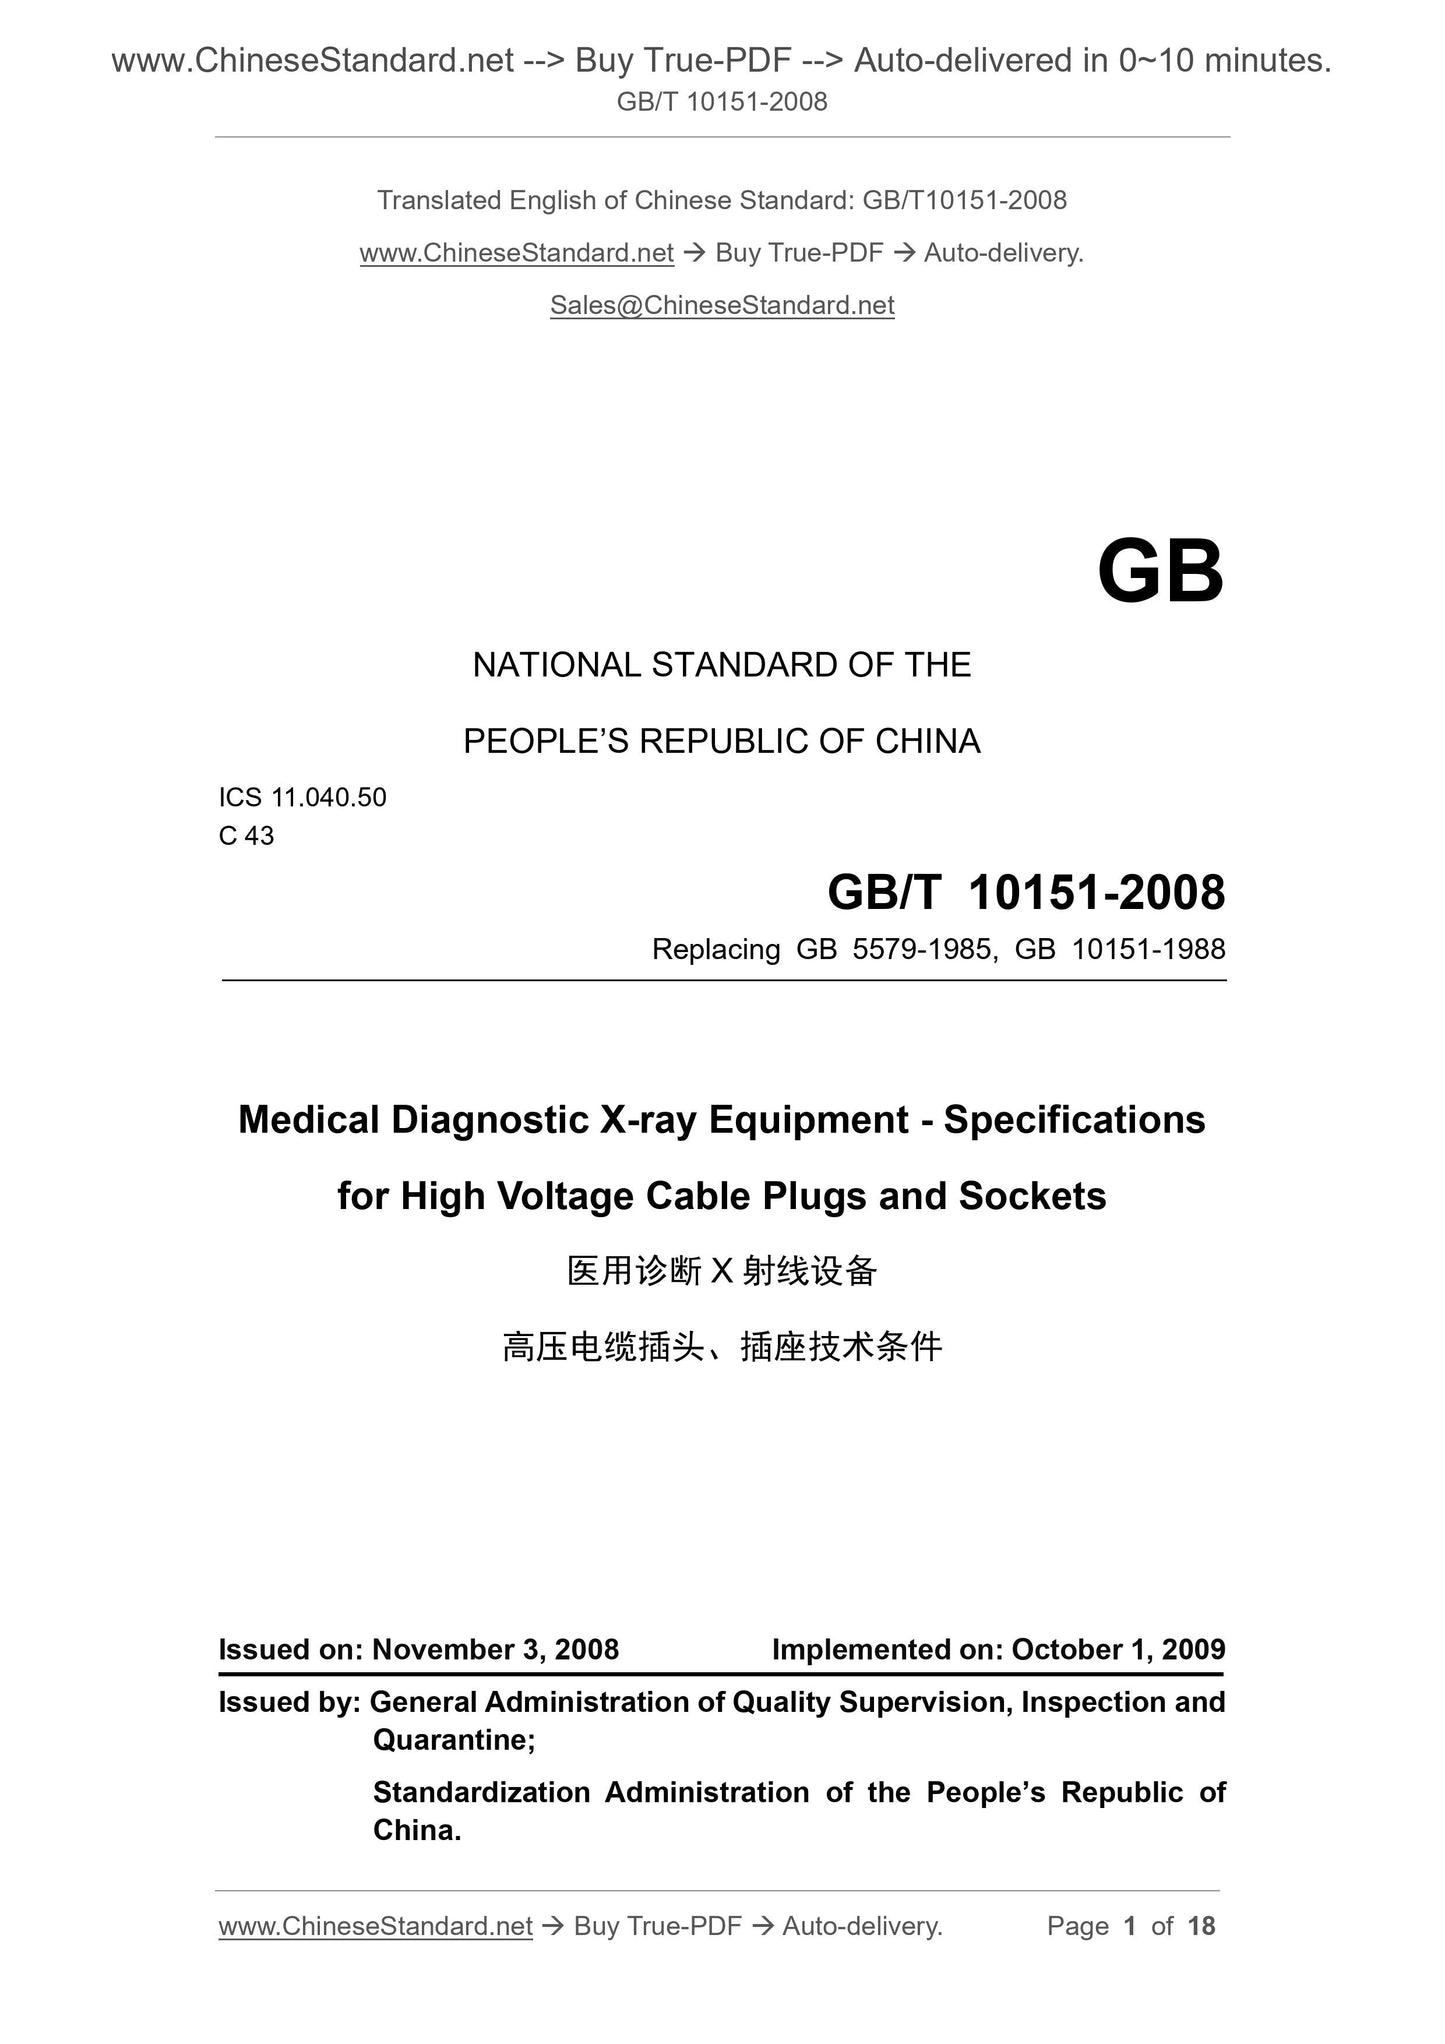 GB/T 10151-2008 Page 1